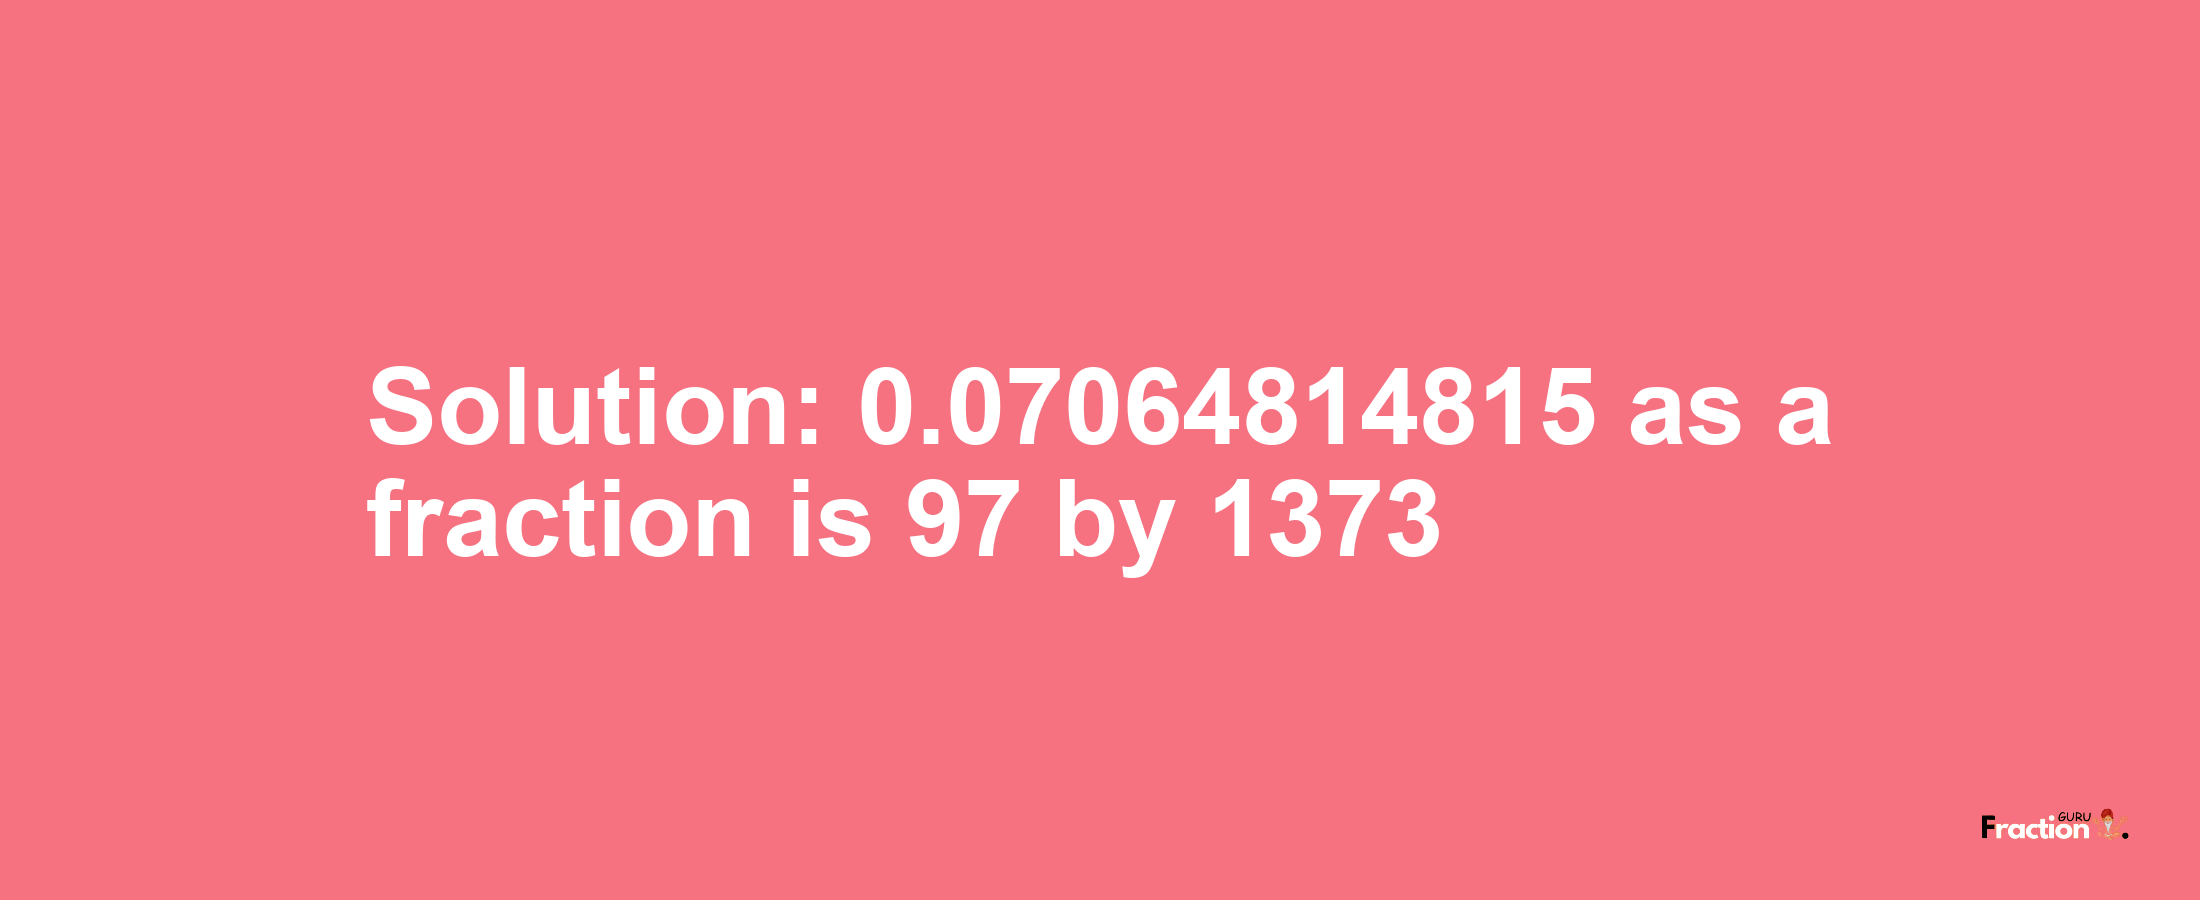 Solution:0.07064814815 as a fraction is 97/1373